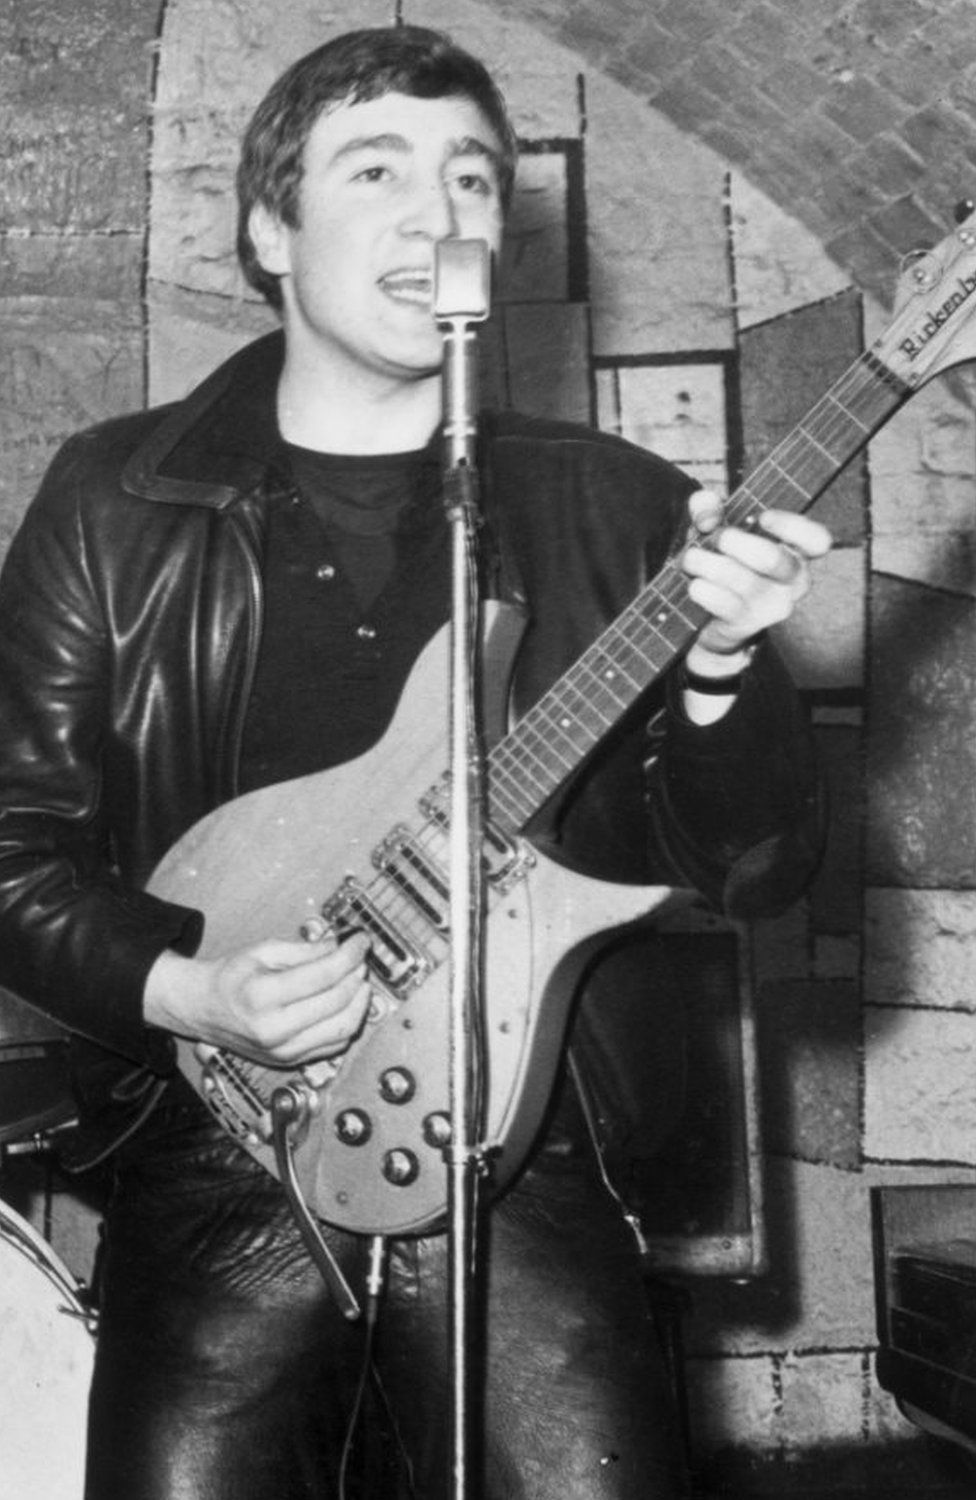 December 1961: Singer, guitarist and songwriter John Lennon (1940 - 1980) of the British group The Beatles live on stage at the Cavern Club in Mathew Street, Liverpool.